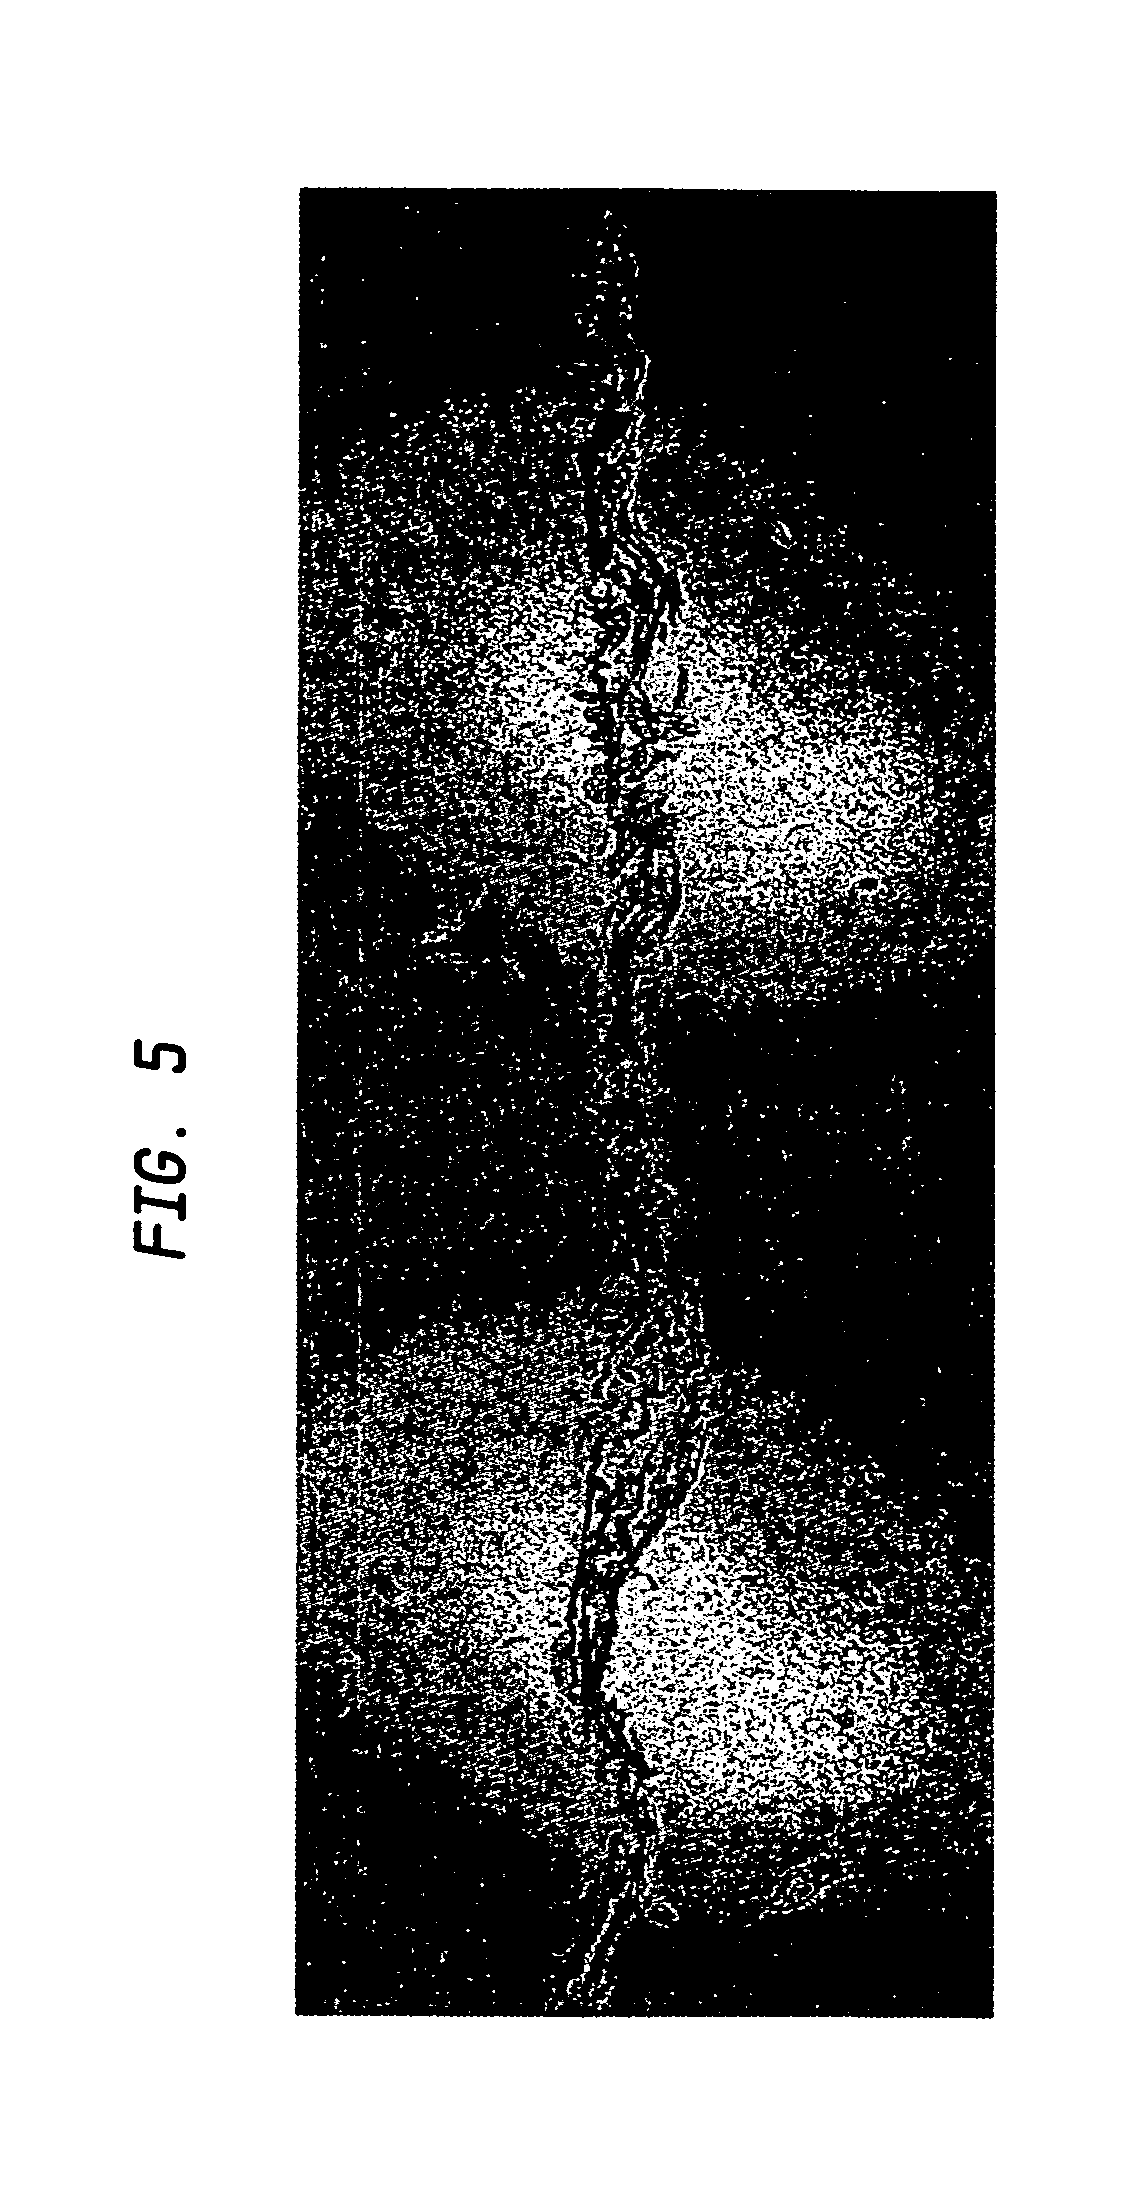 Method of making fabric-creped sheet for dispensers